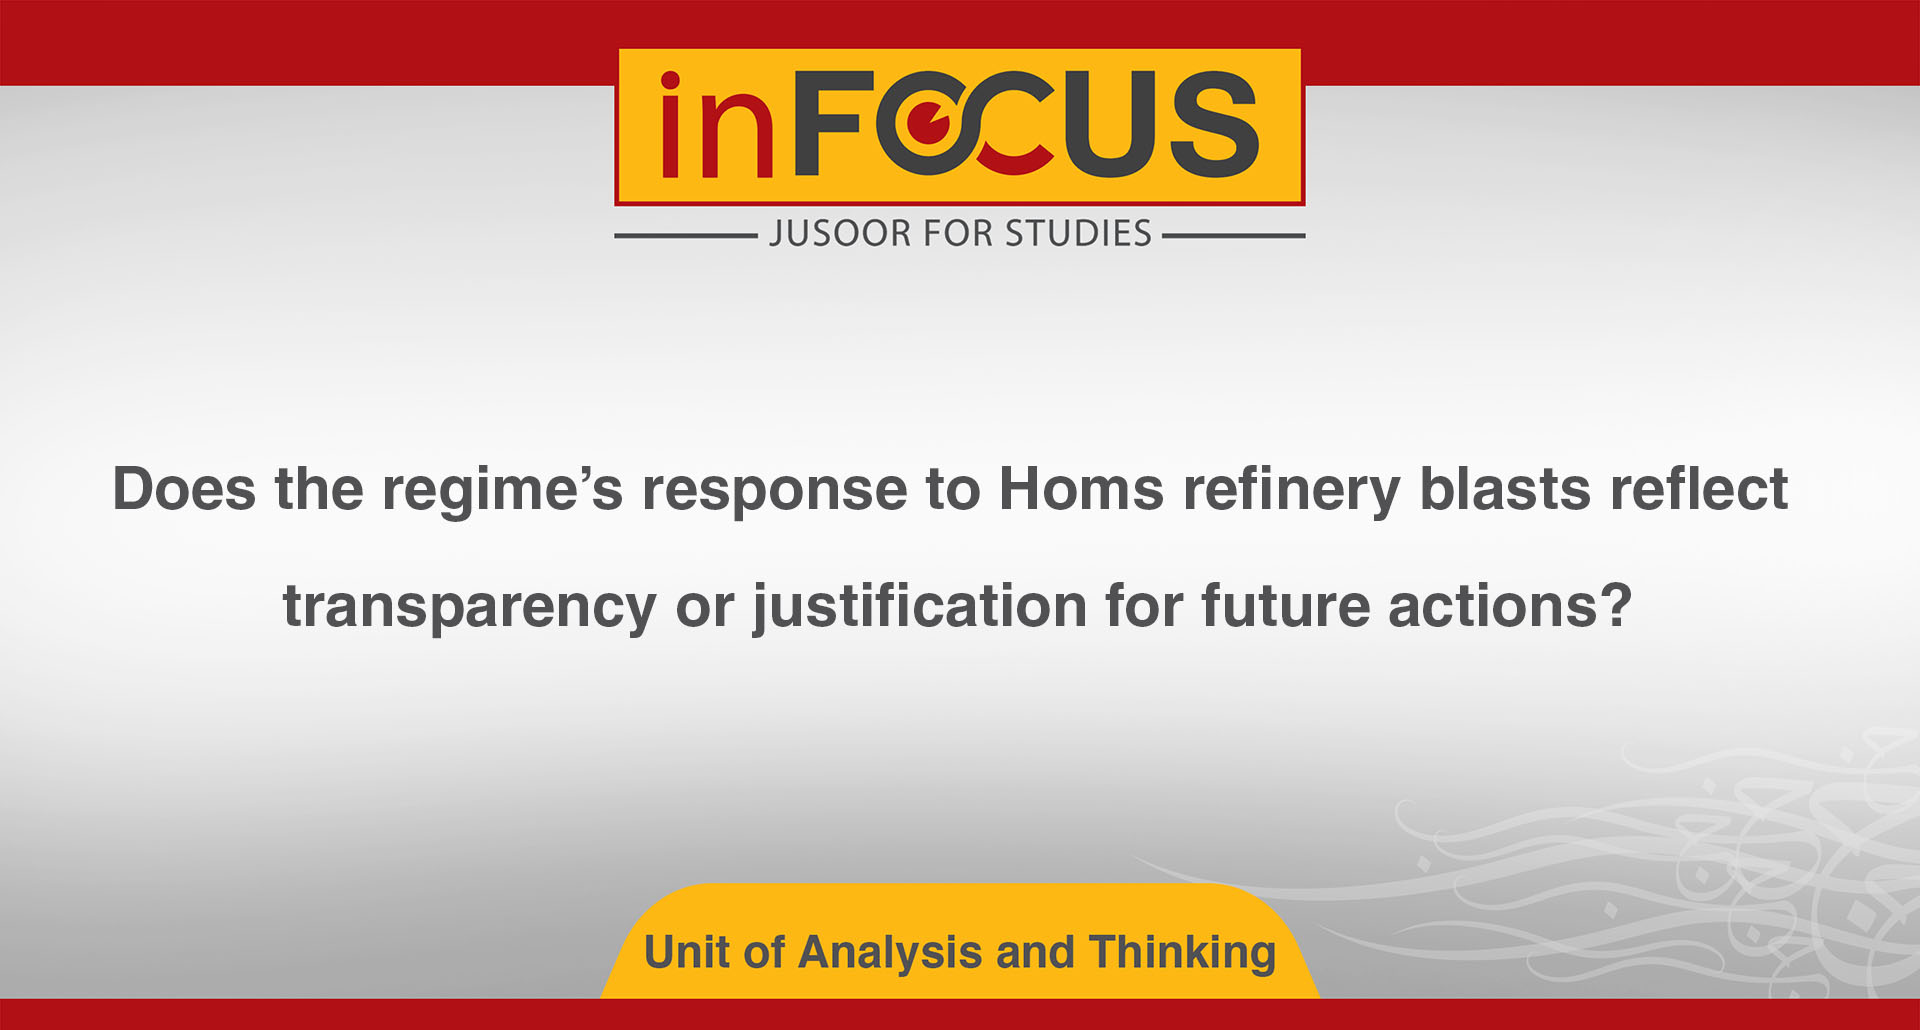 Does the regime’s response to Homs refinery blasts reflect transparency or justification for future actions?